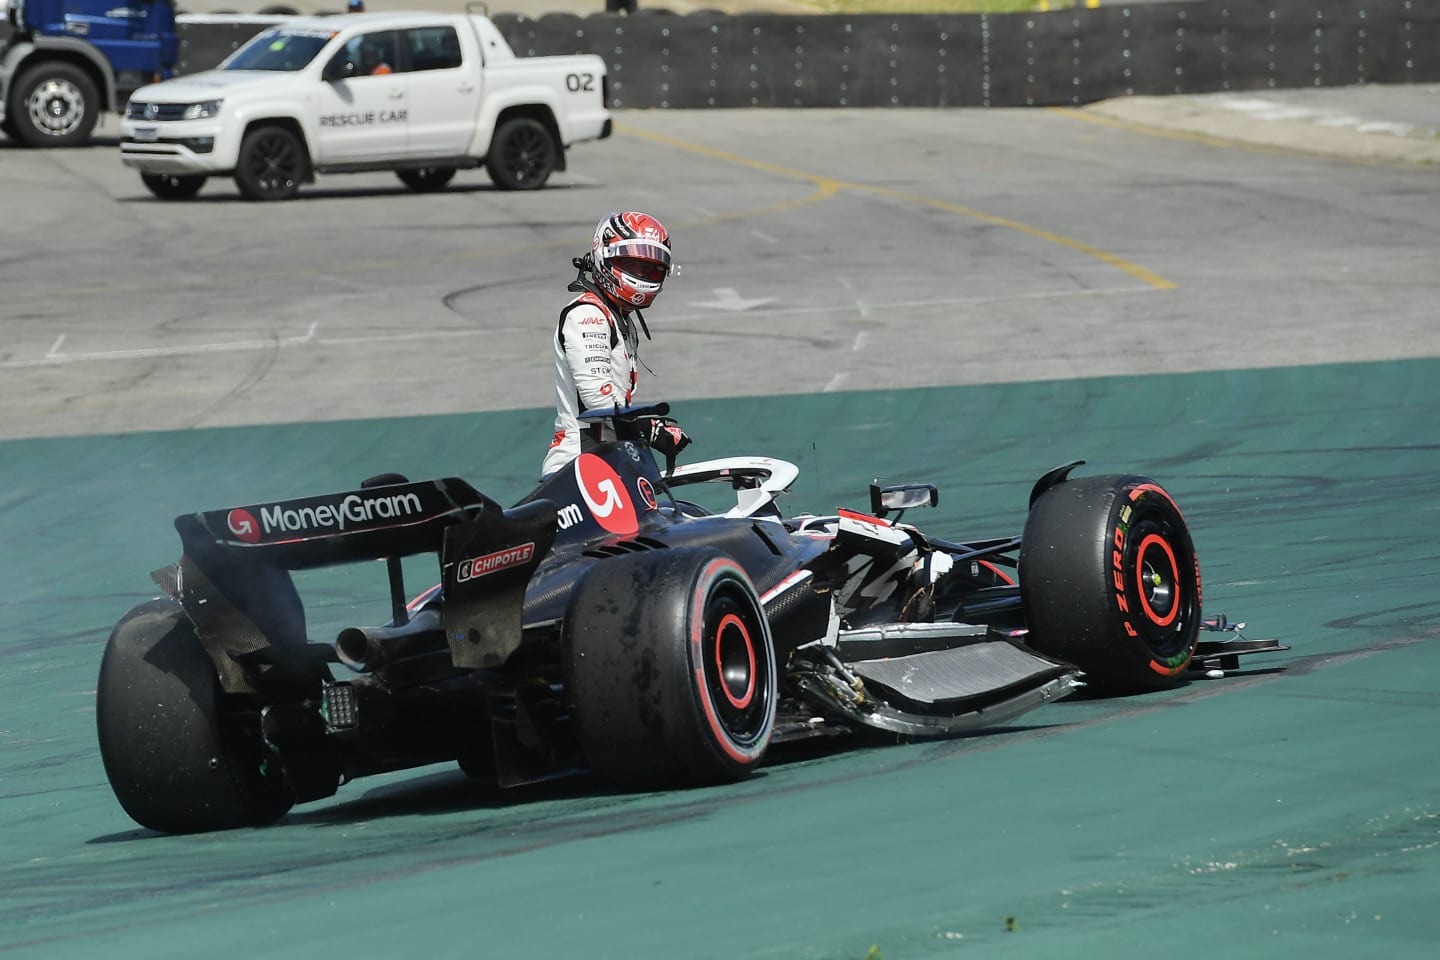 It was Magnussen's second DNF in a row